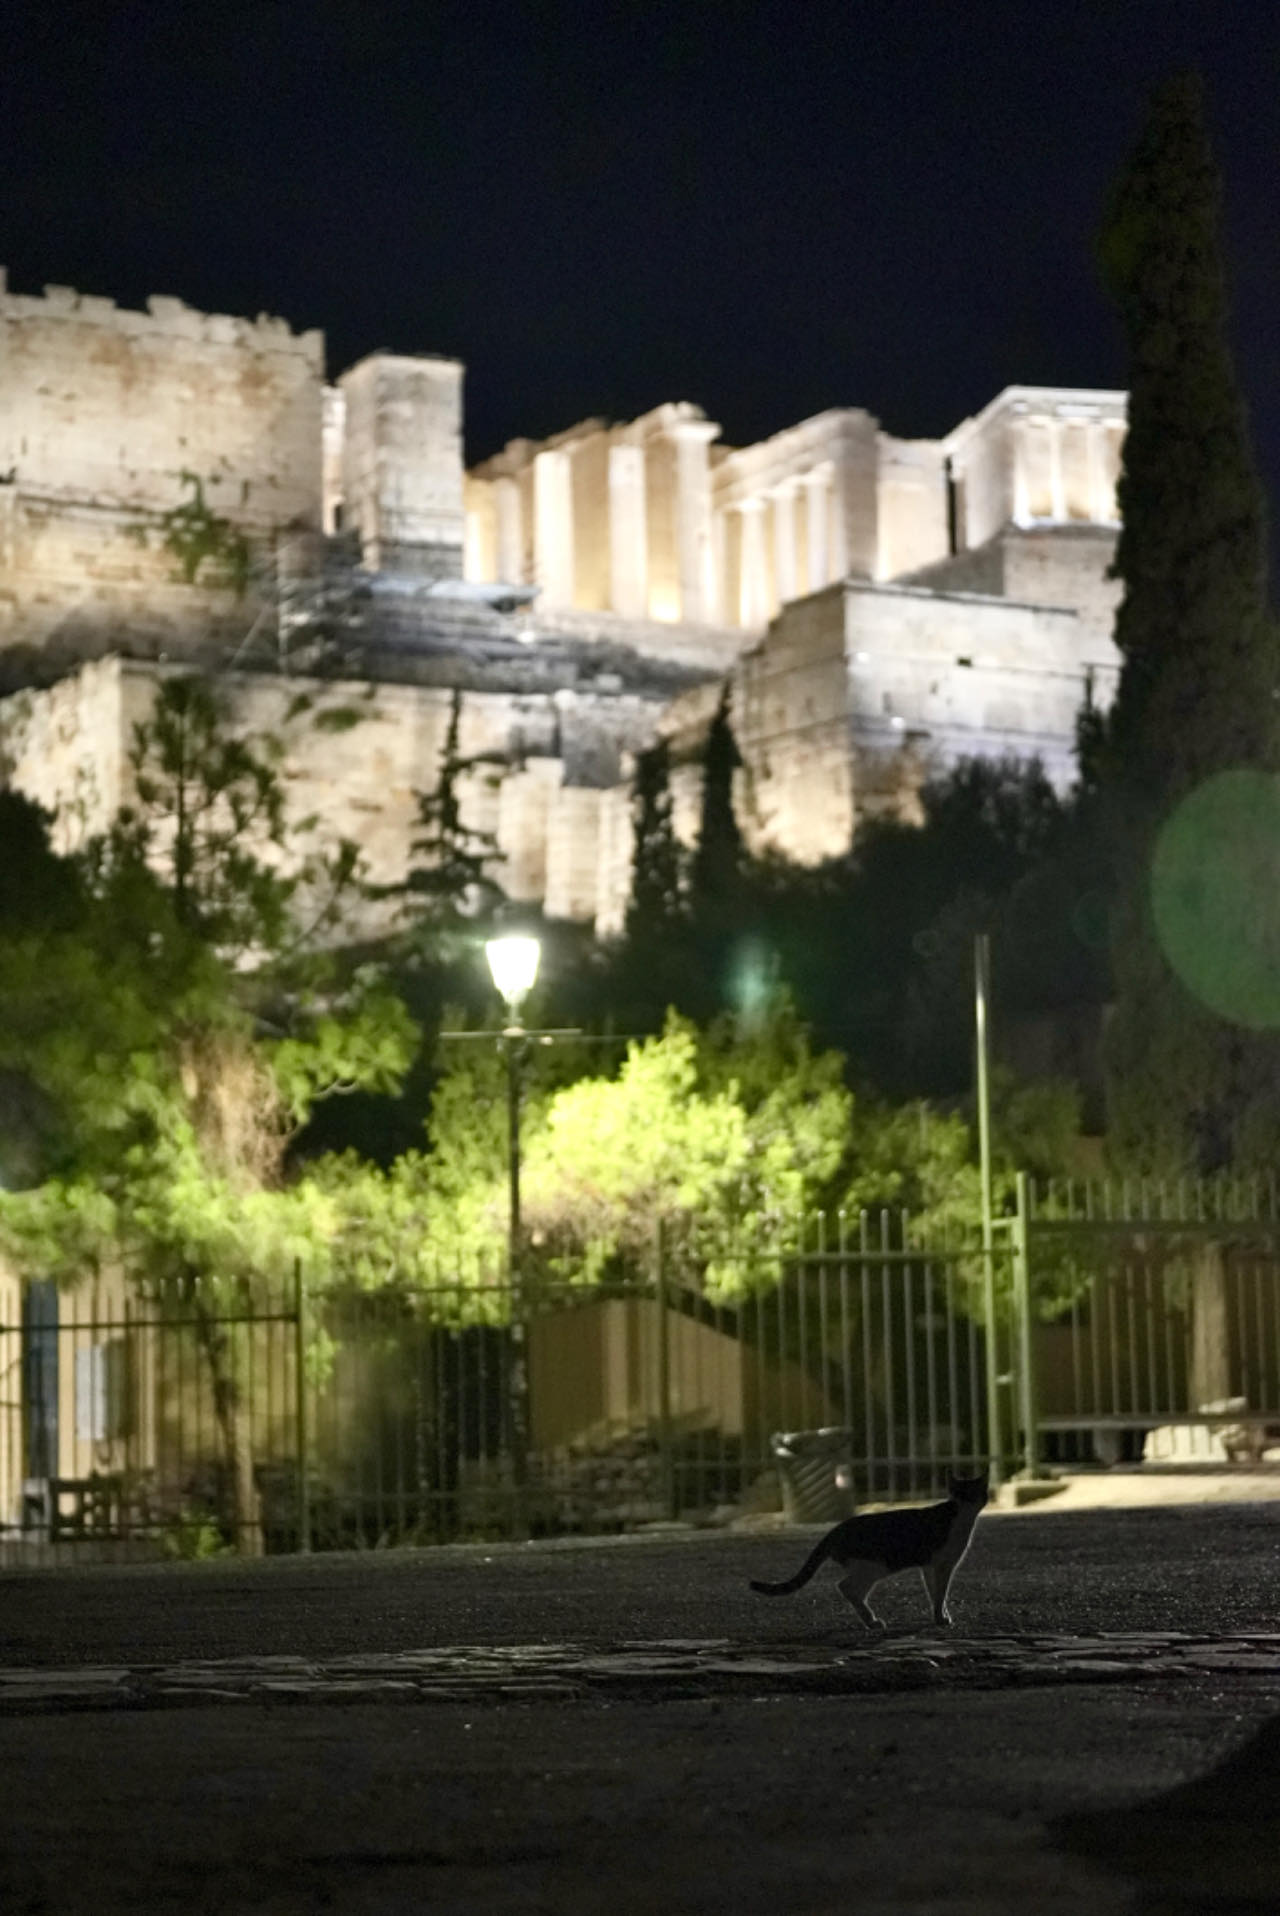 A cat walks past the ancient buildings of the Acropolis of Athens in Athens, Greece. /CGTN